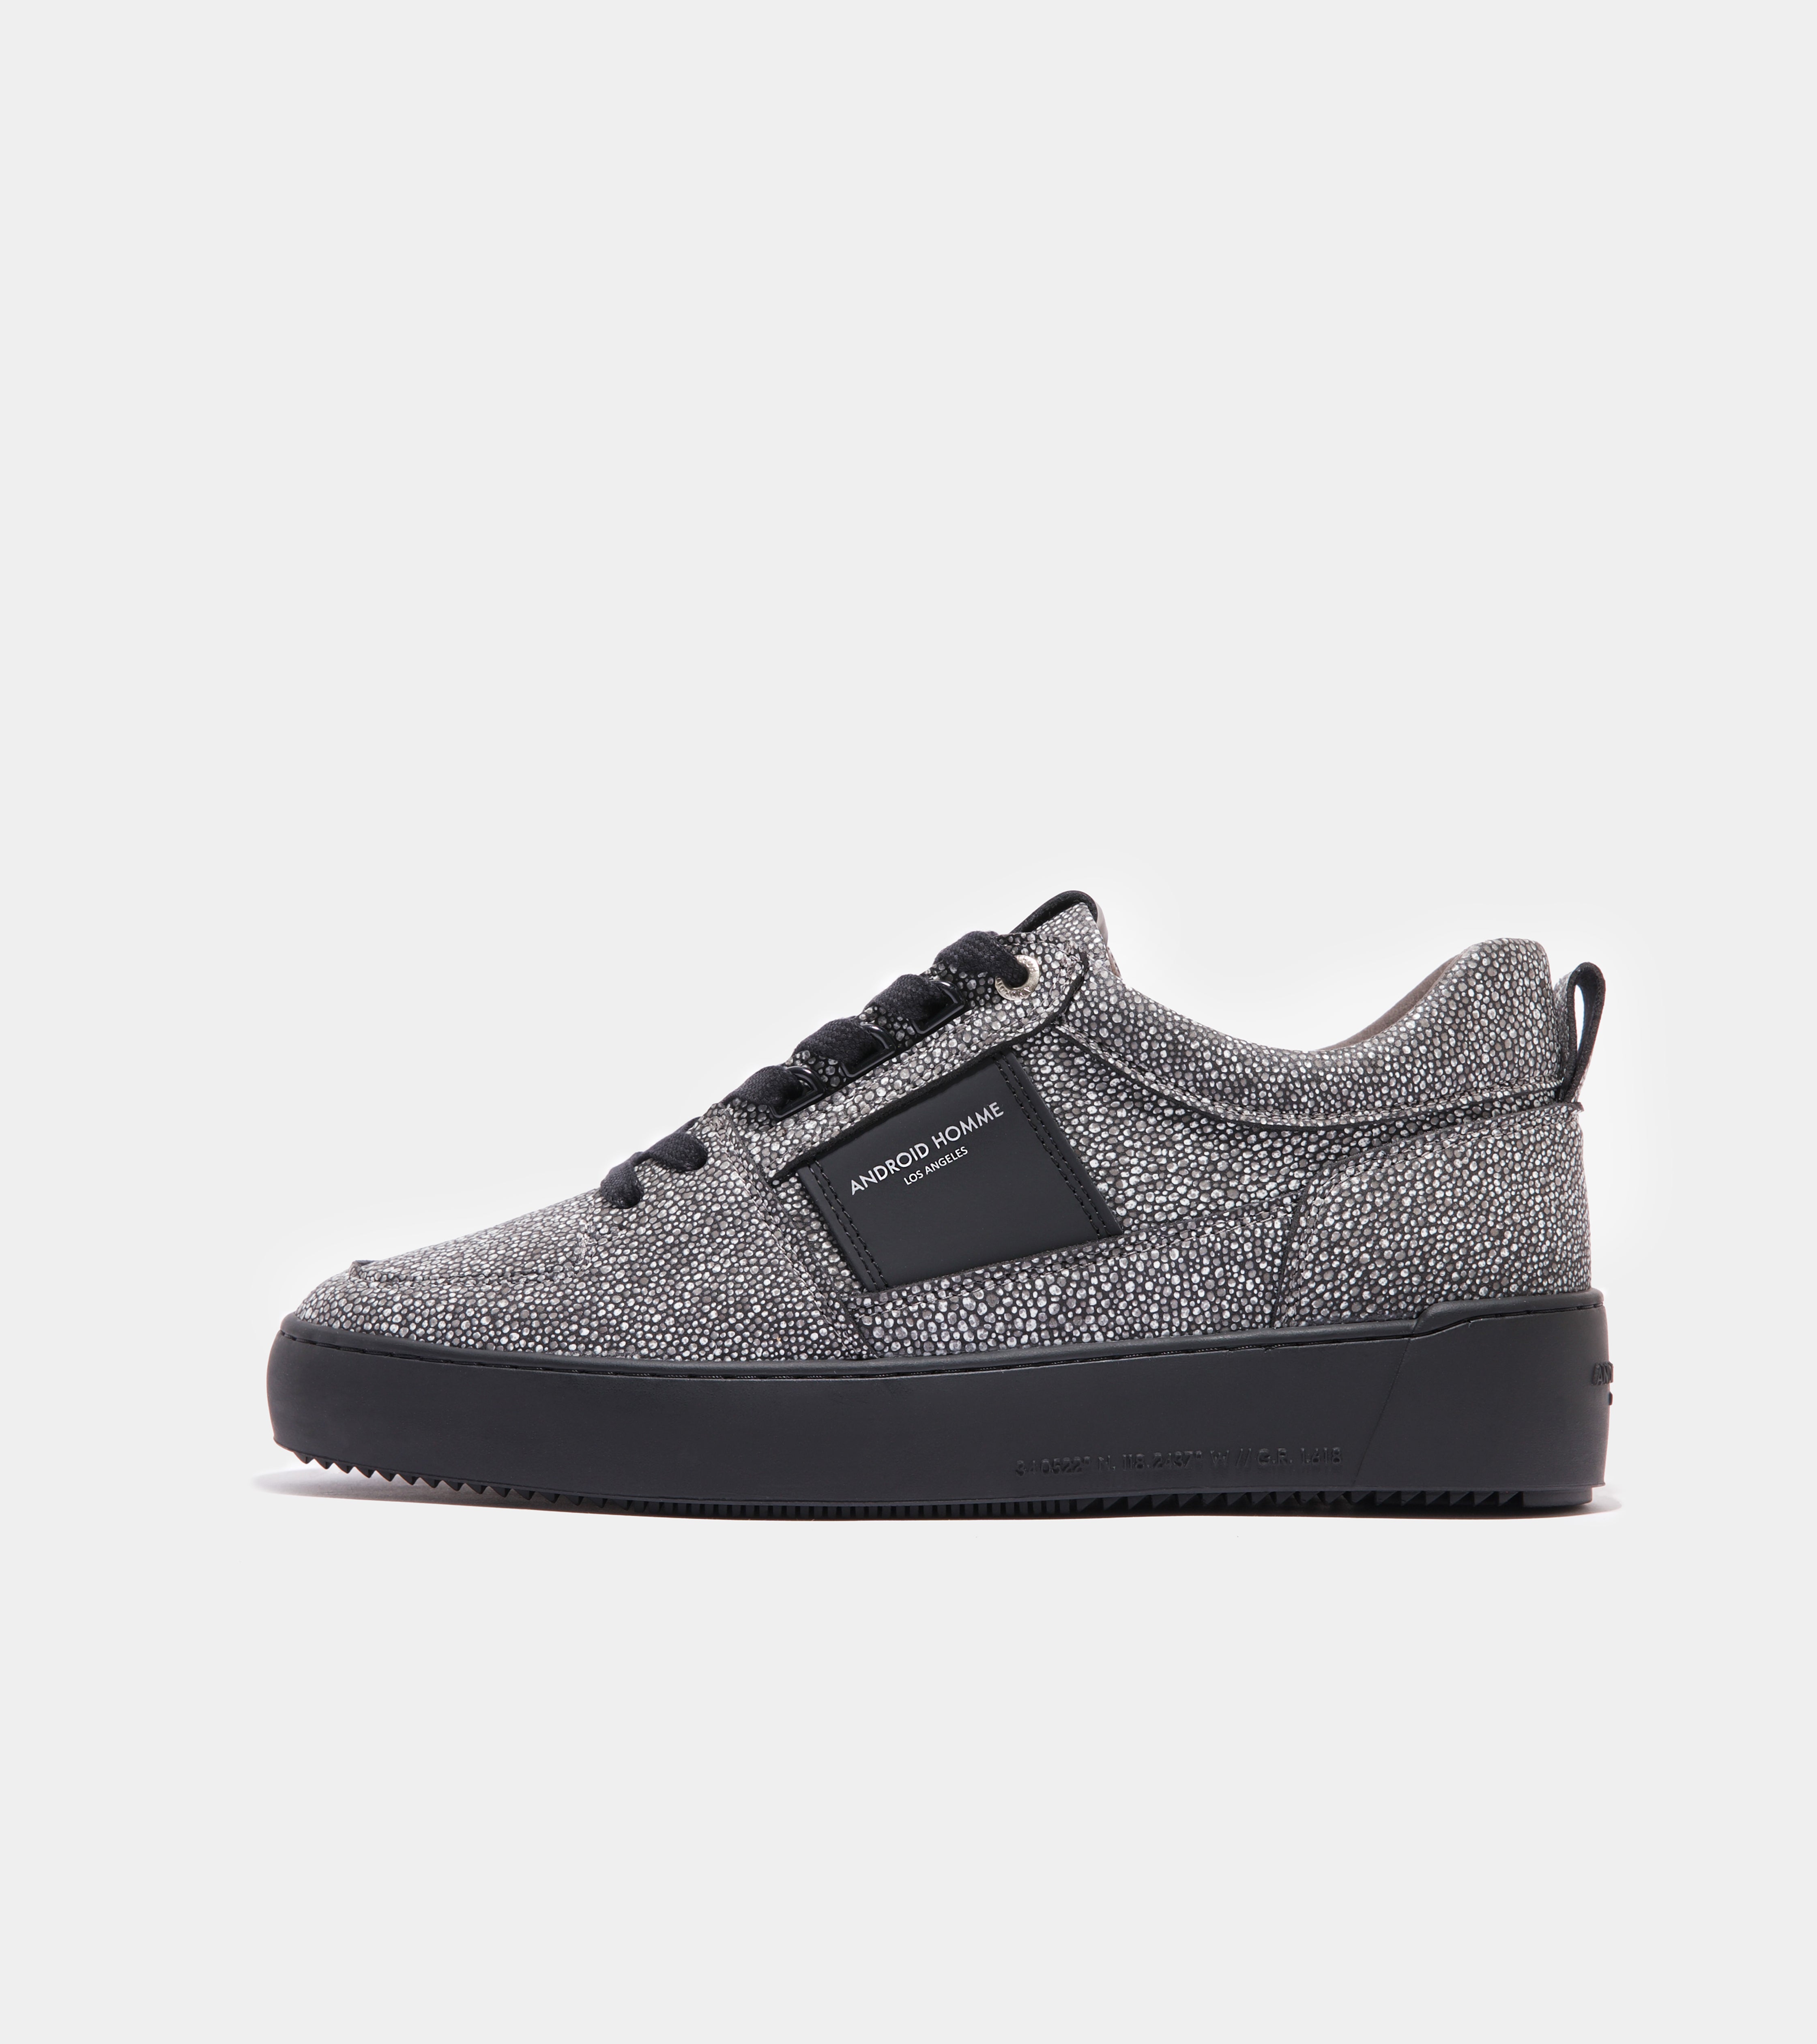 Point Dume Low | Black Reflective Caviar AHP241-06